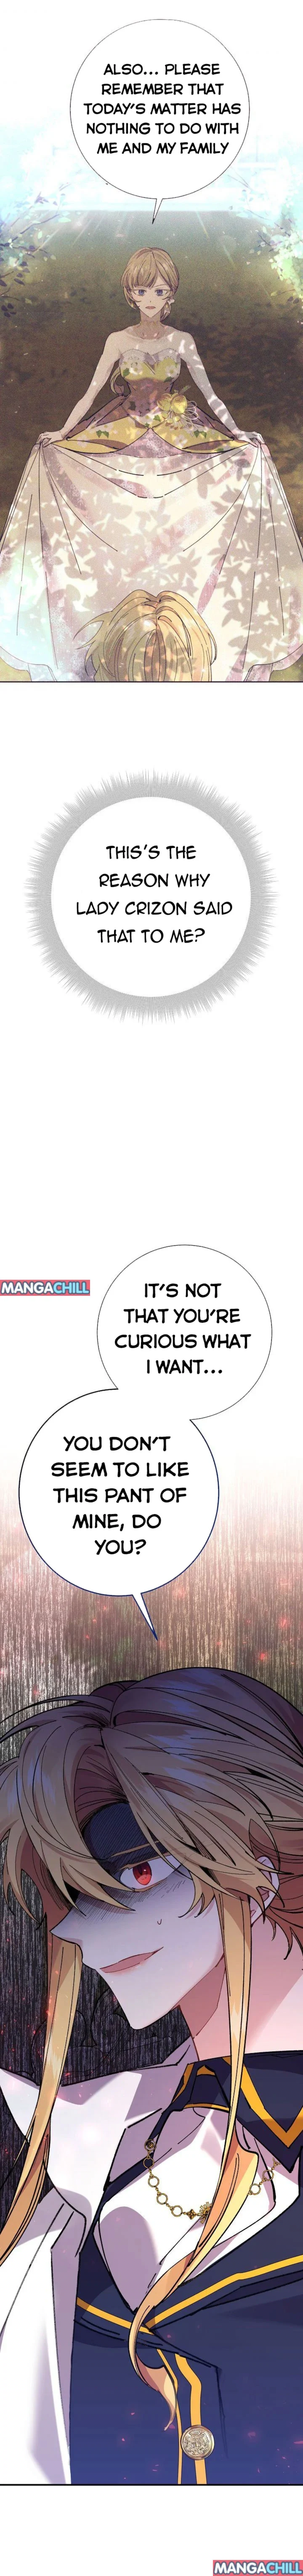 It’s Useless to Hang On Chapter 34 - Page 15